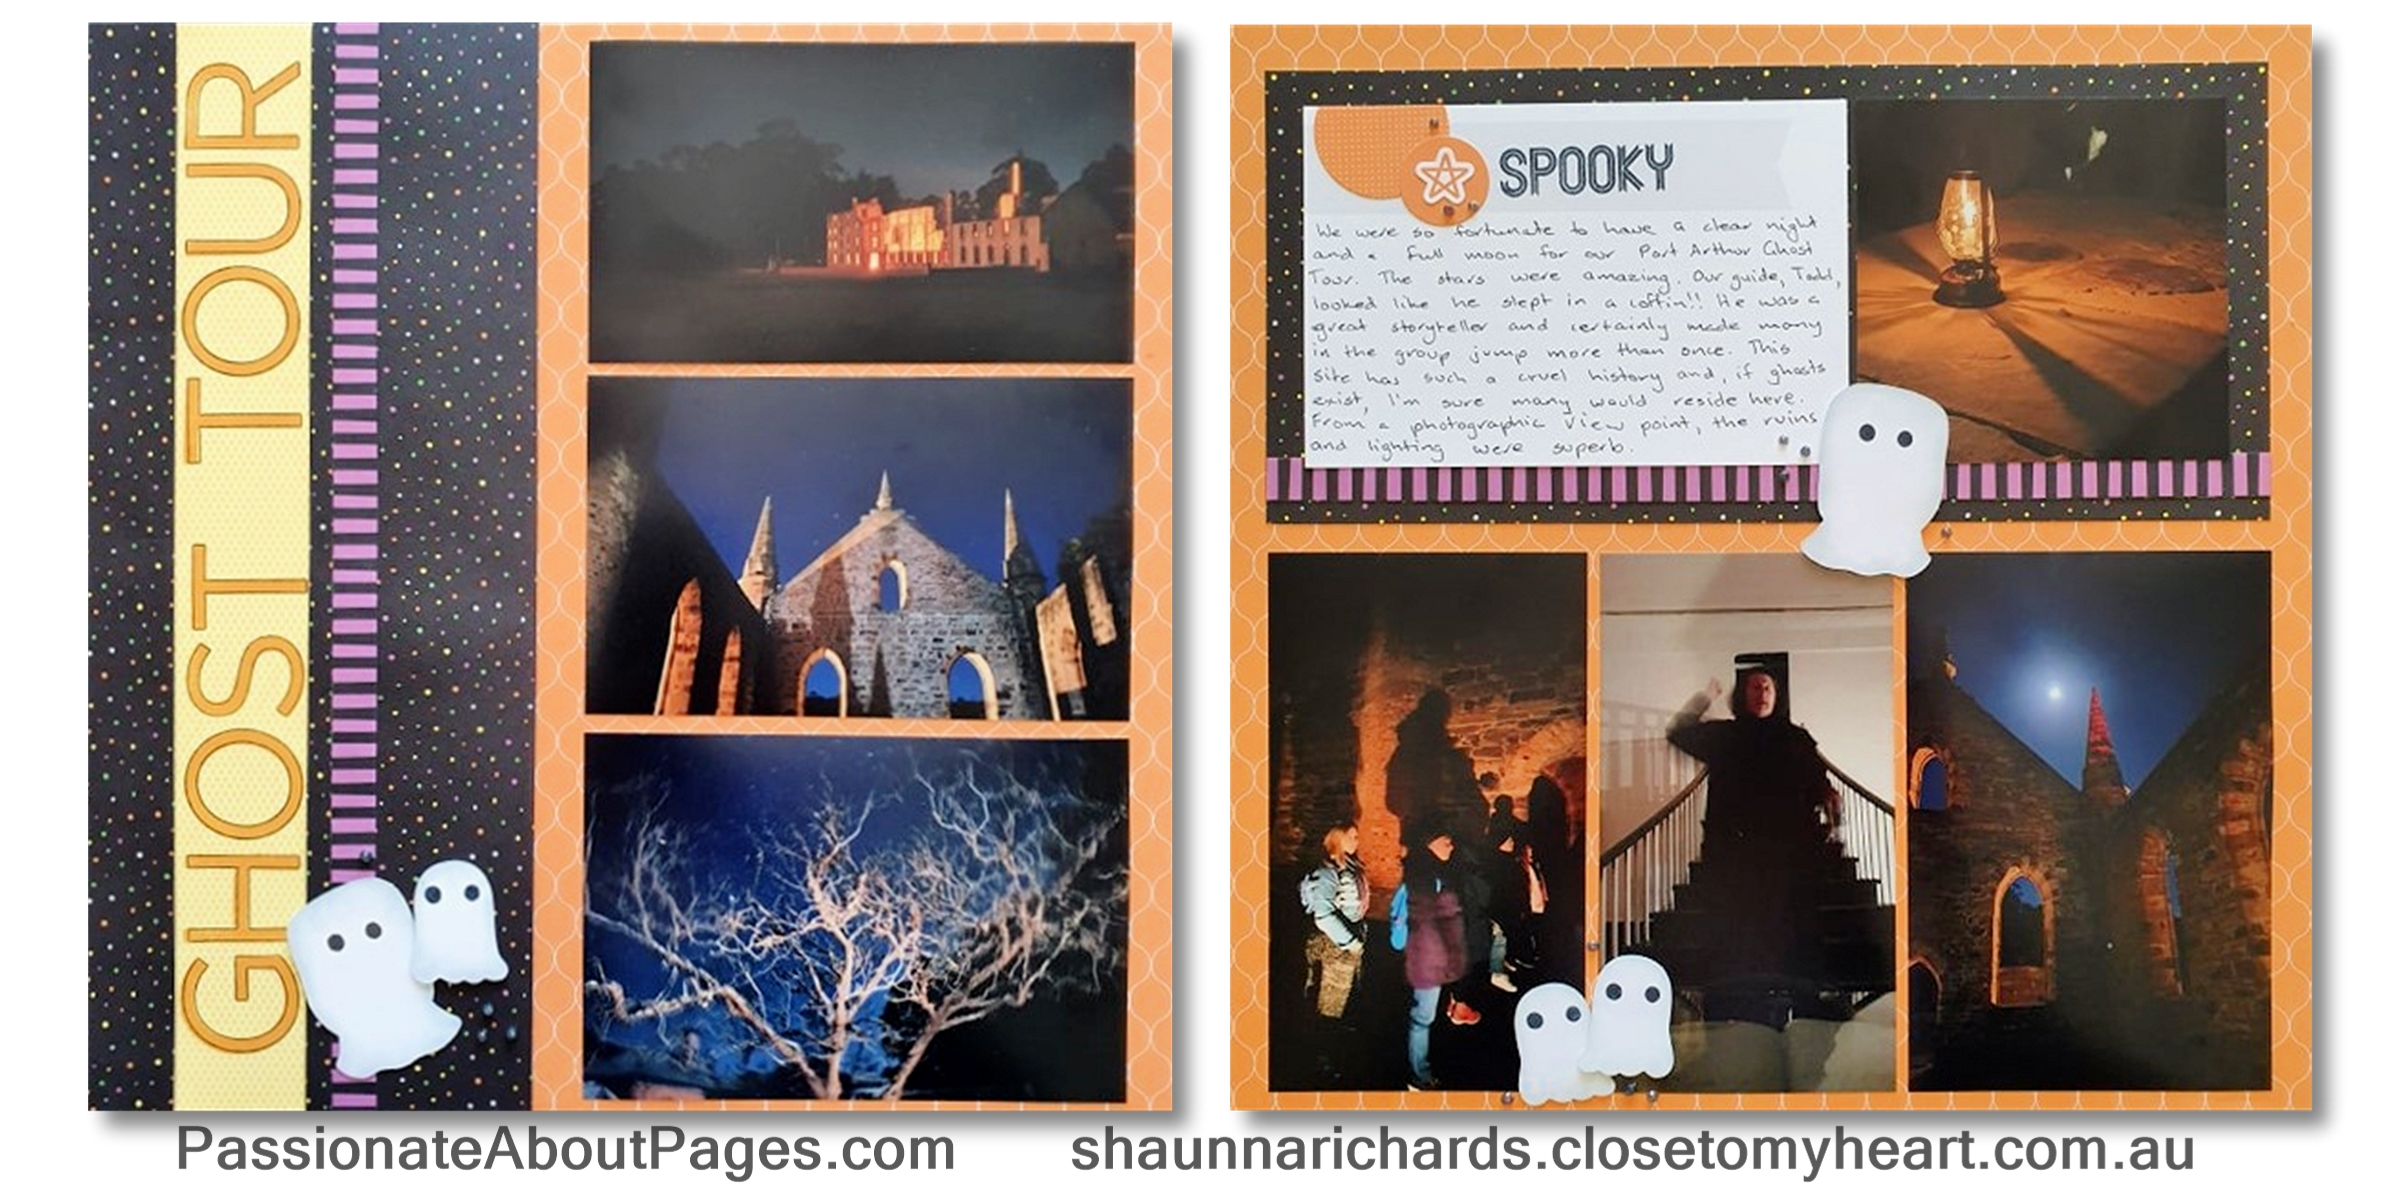 Close To My Heart’s Spooktacular collection adapts brilliantly to a variety of scrapbook themes and card designs.  Order your collection at www.shaunnarichards.closetomyheart.com.au before the end of October 2019